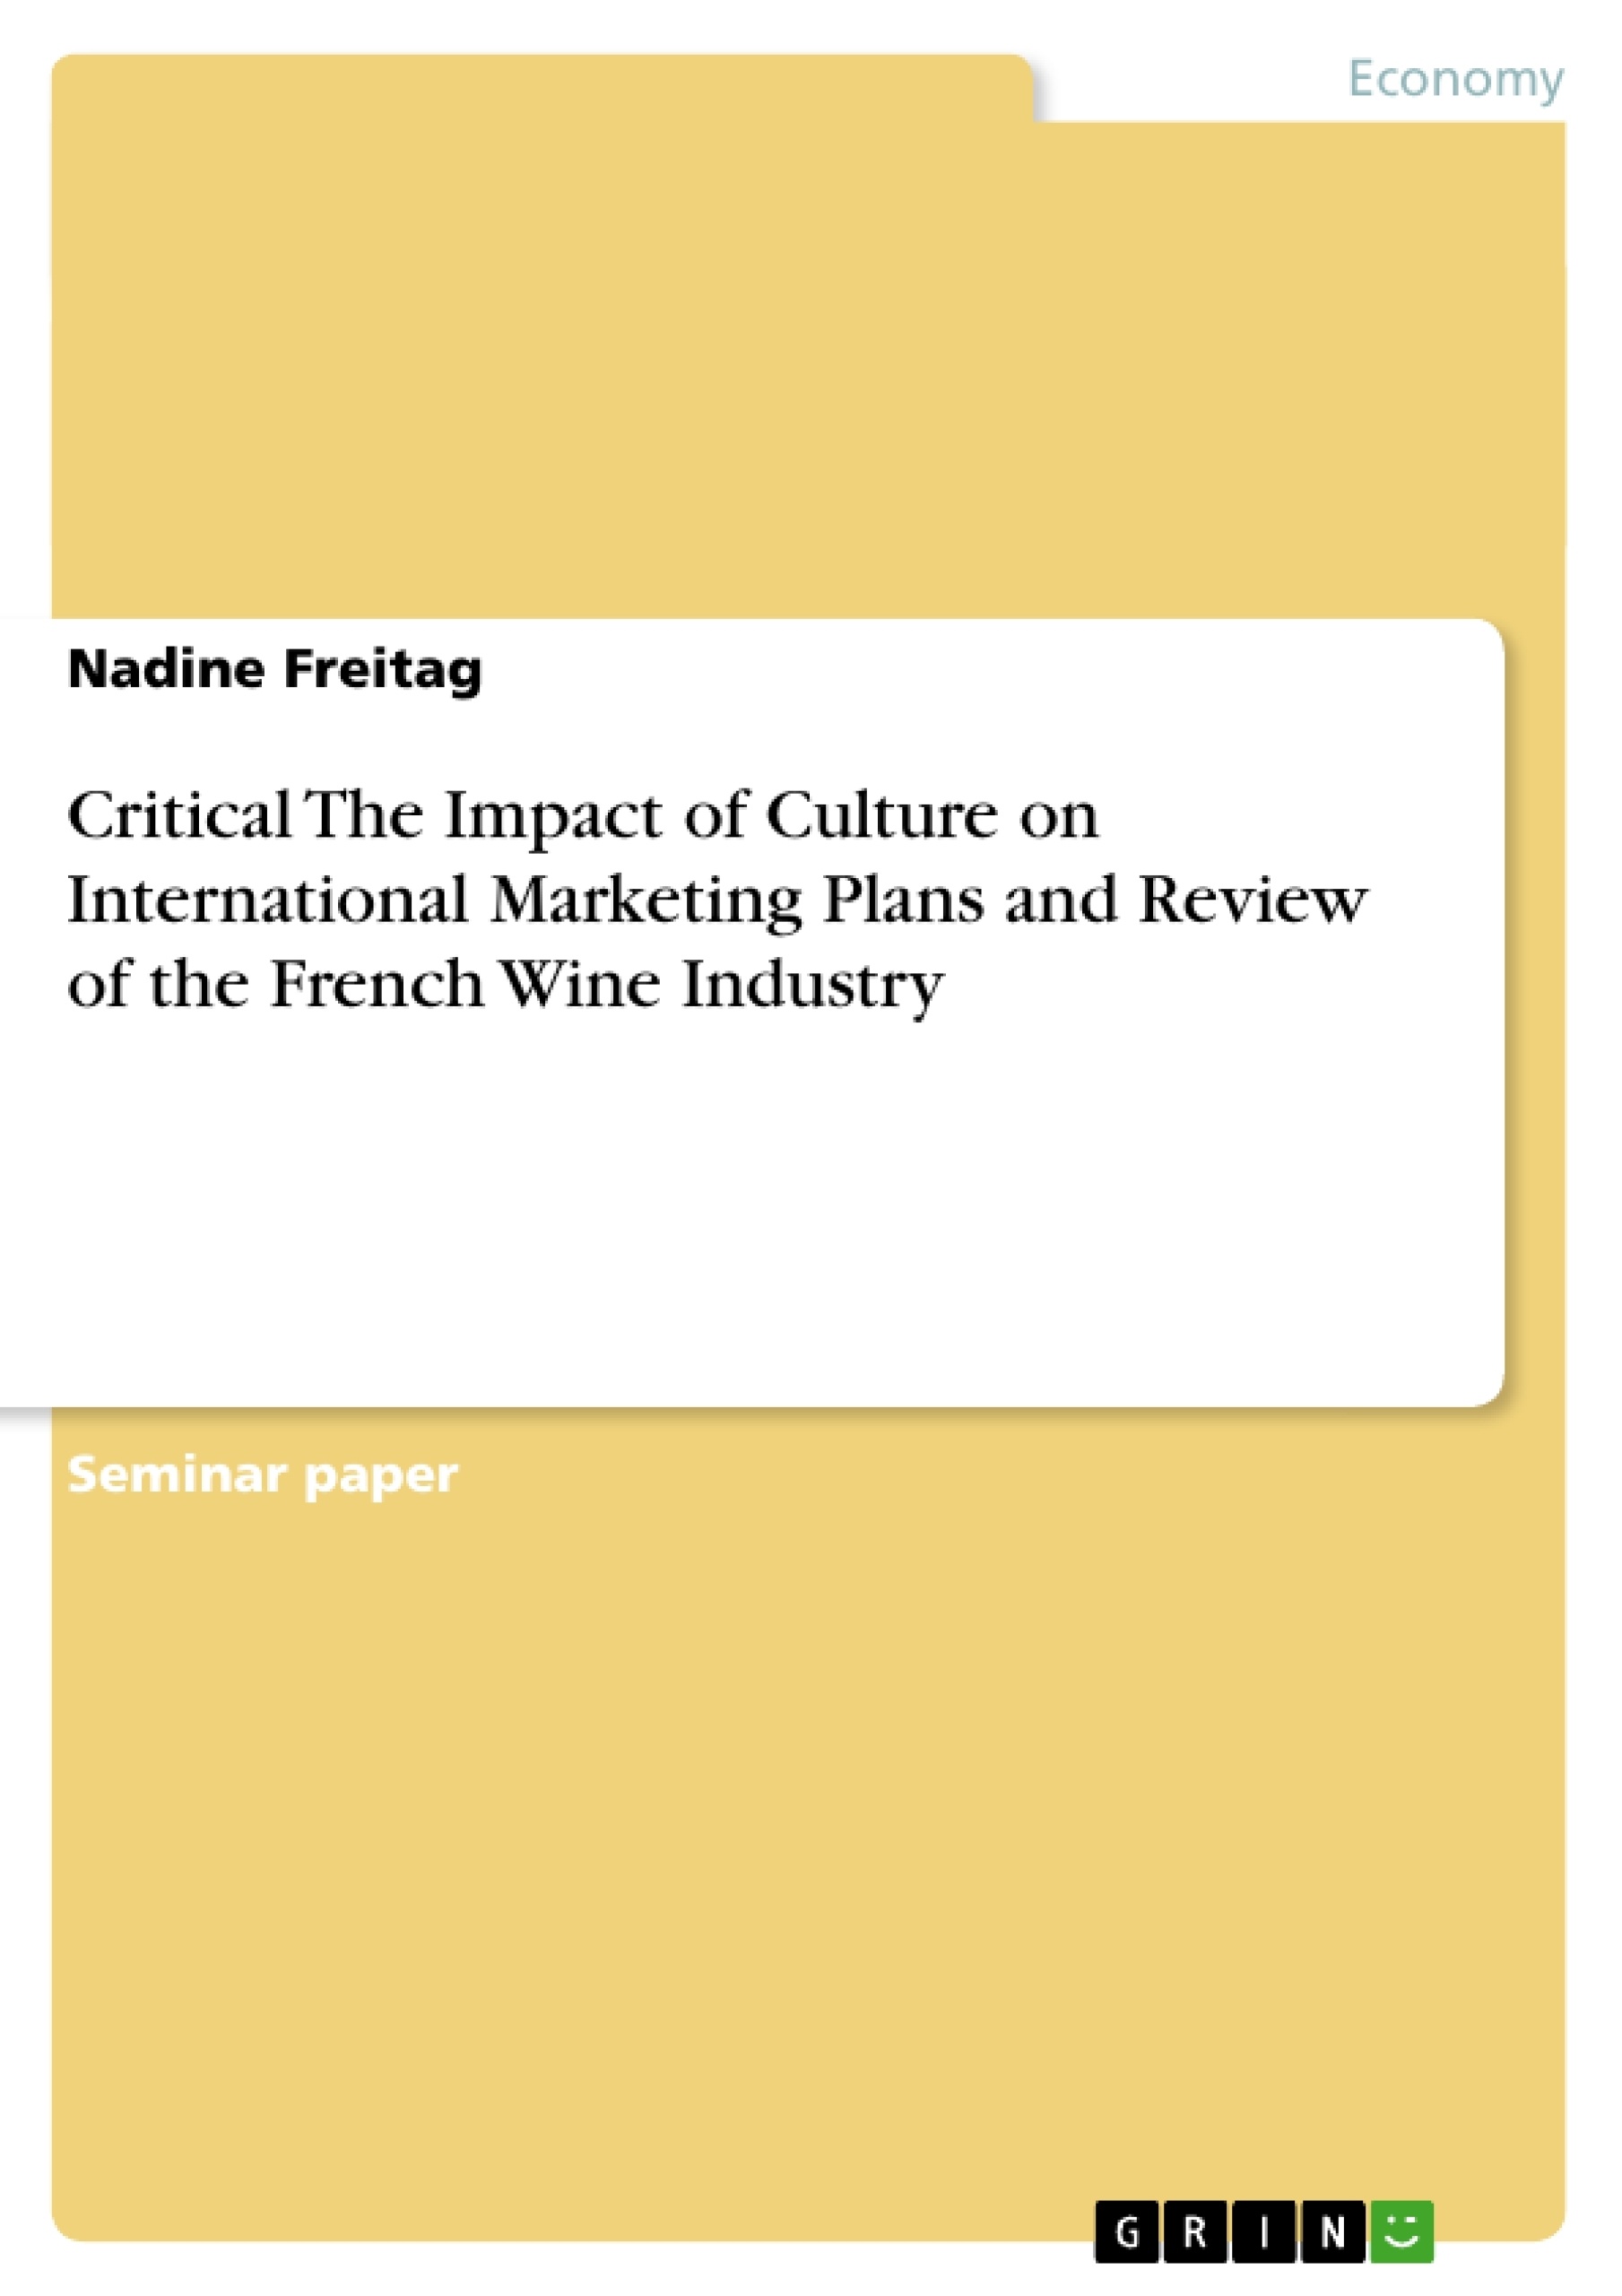 Title: Critical The Impact of Culture on International Marketing Plans and Review of the French Wine Industry